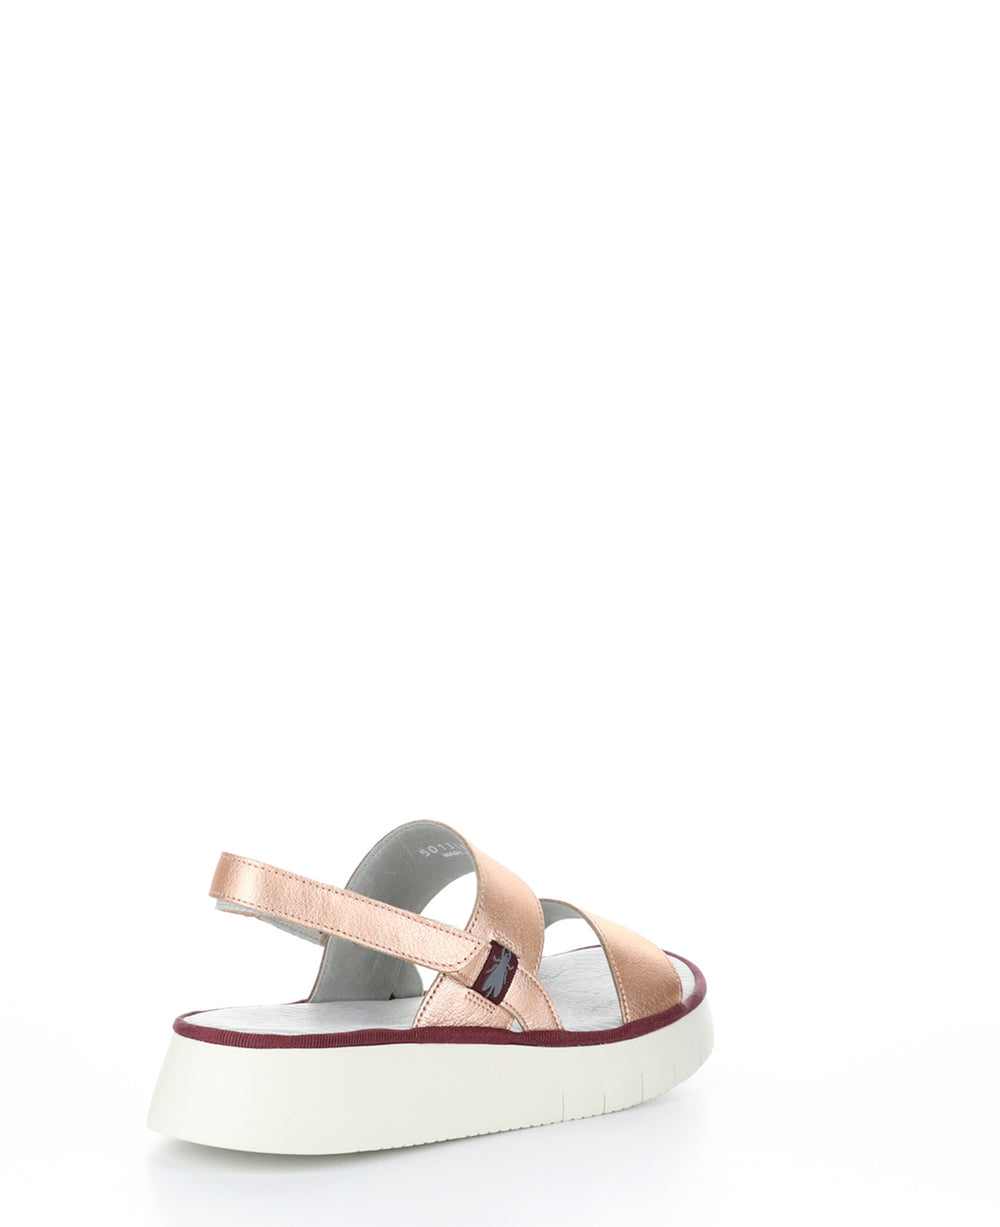 CURA318FLY BLUSH GOLD Wedge Sandals